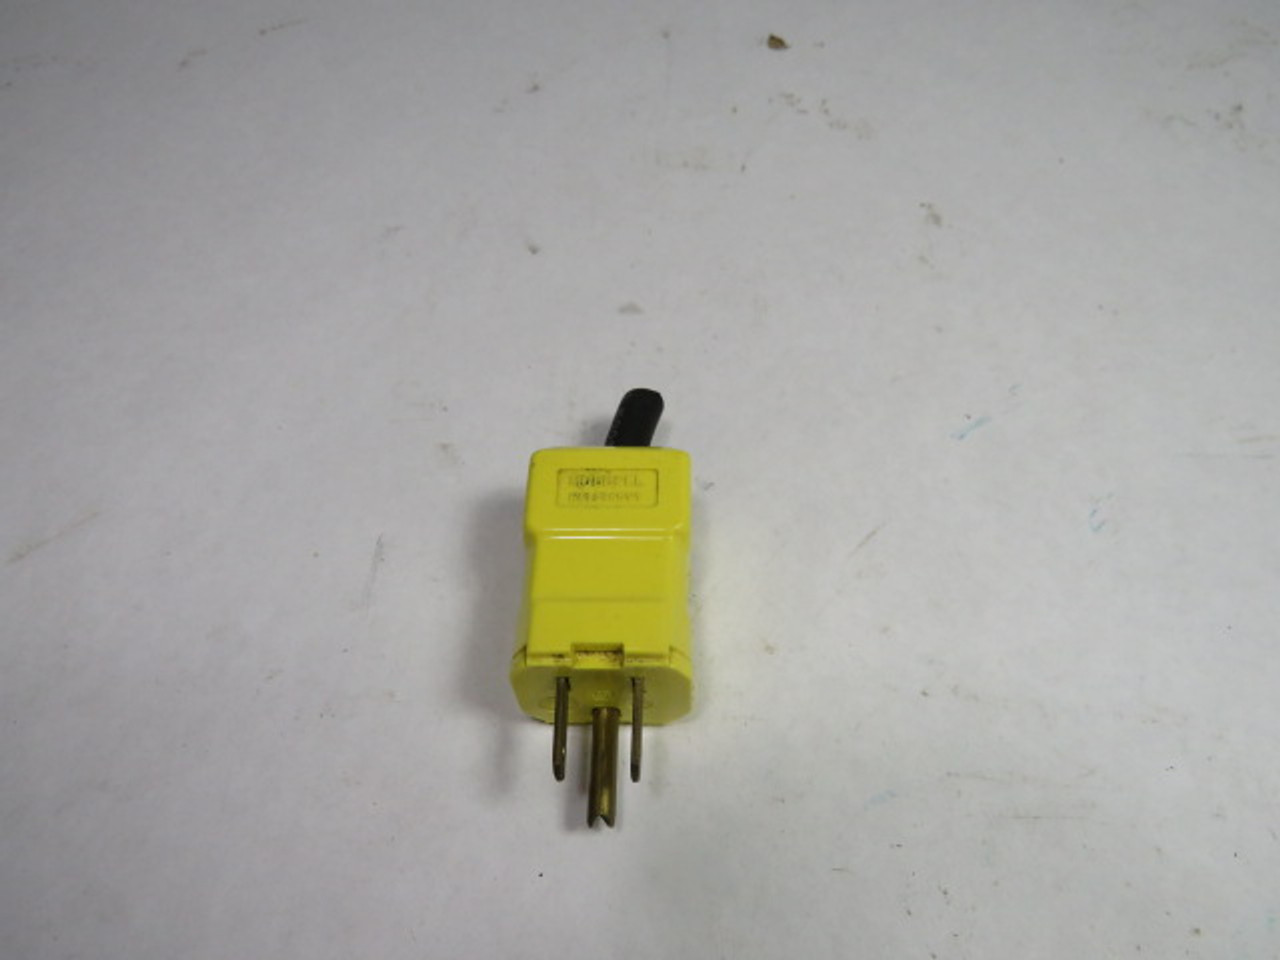 Hubbell HBL5965VY Straight Blade Plug 15A 125VAC 3W 2P USED